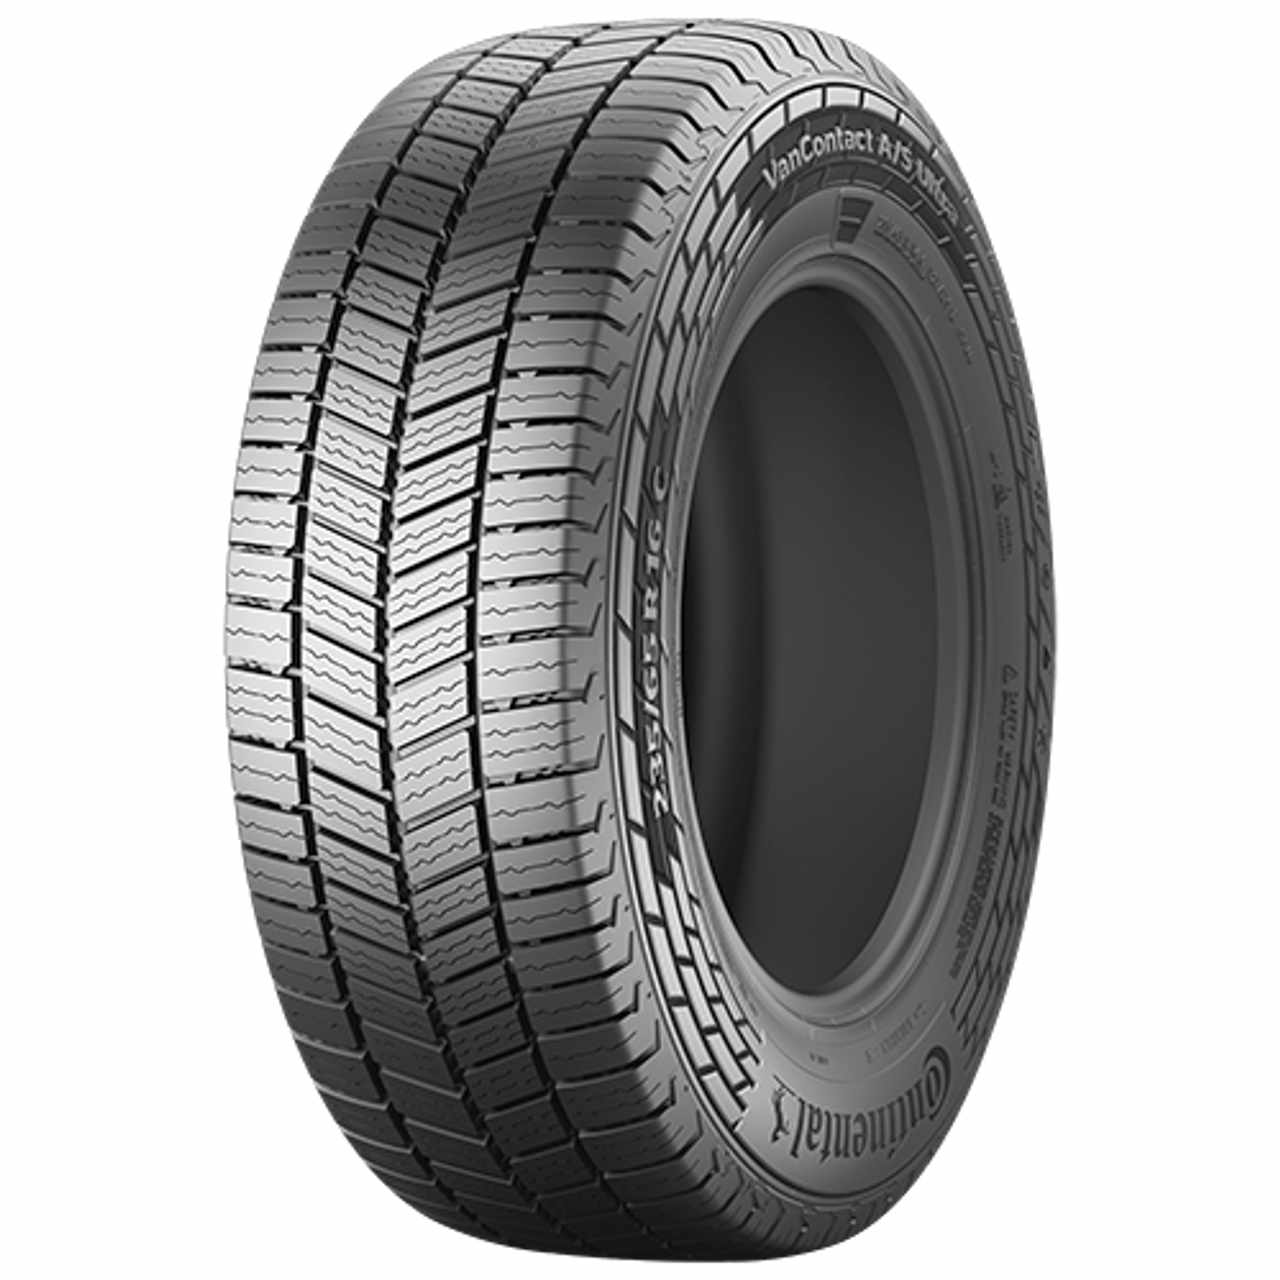 CONTINENTAL VANCONTACT A/S ULTRA 215/65R16C 106T BSW von Continental